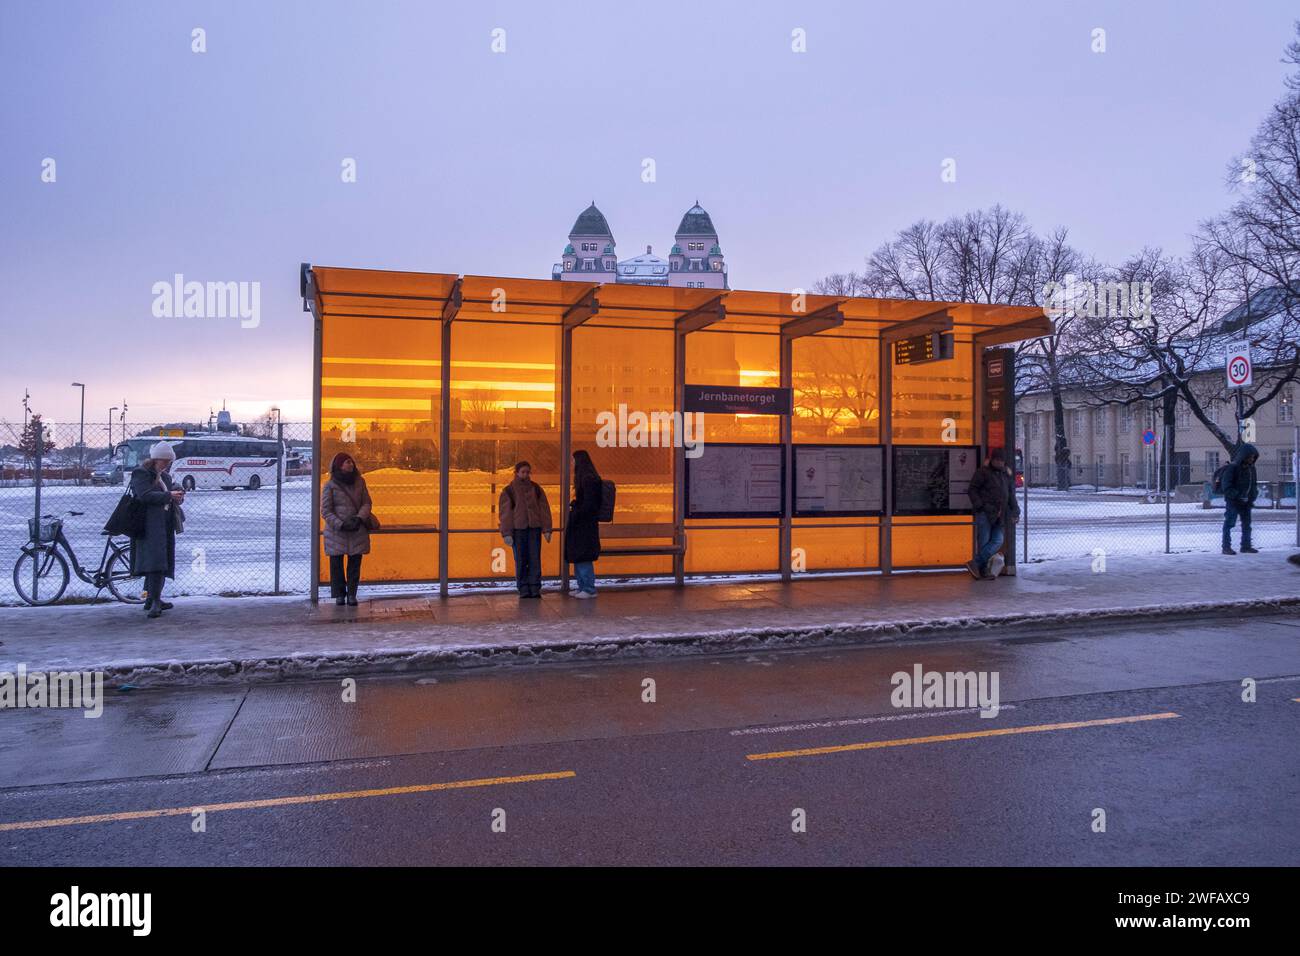 People waiting at a bus stop in central Oslo, Norway, in the winter Stock Photo